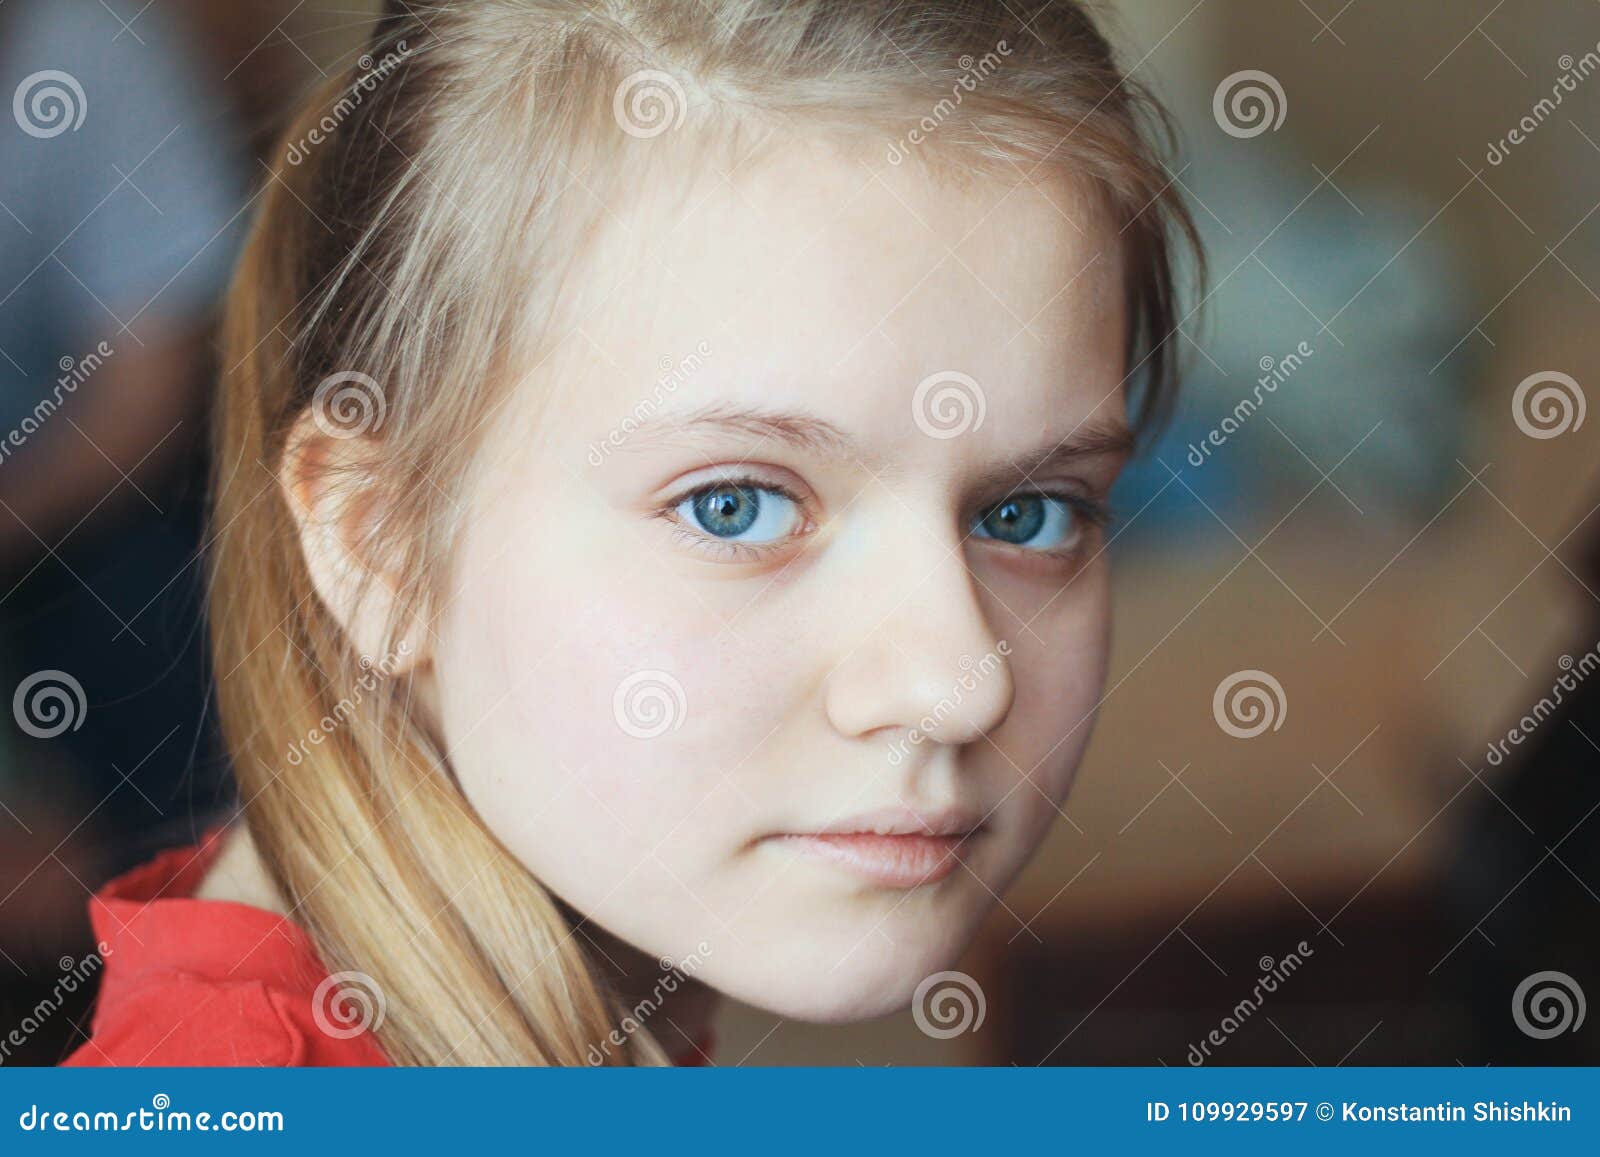 7. Blonde Hair Girl Stock Photos, Pictures & Royalty-Free Images - iStock - wide 7